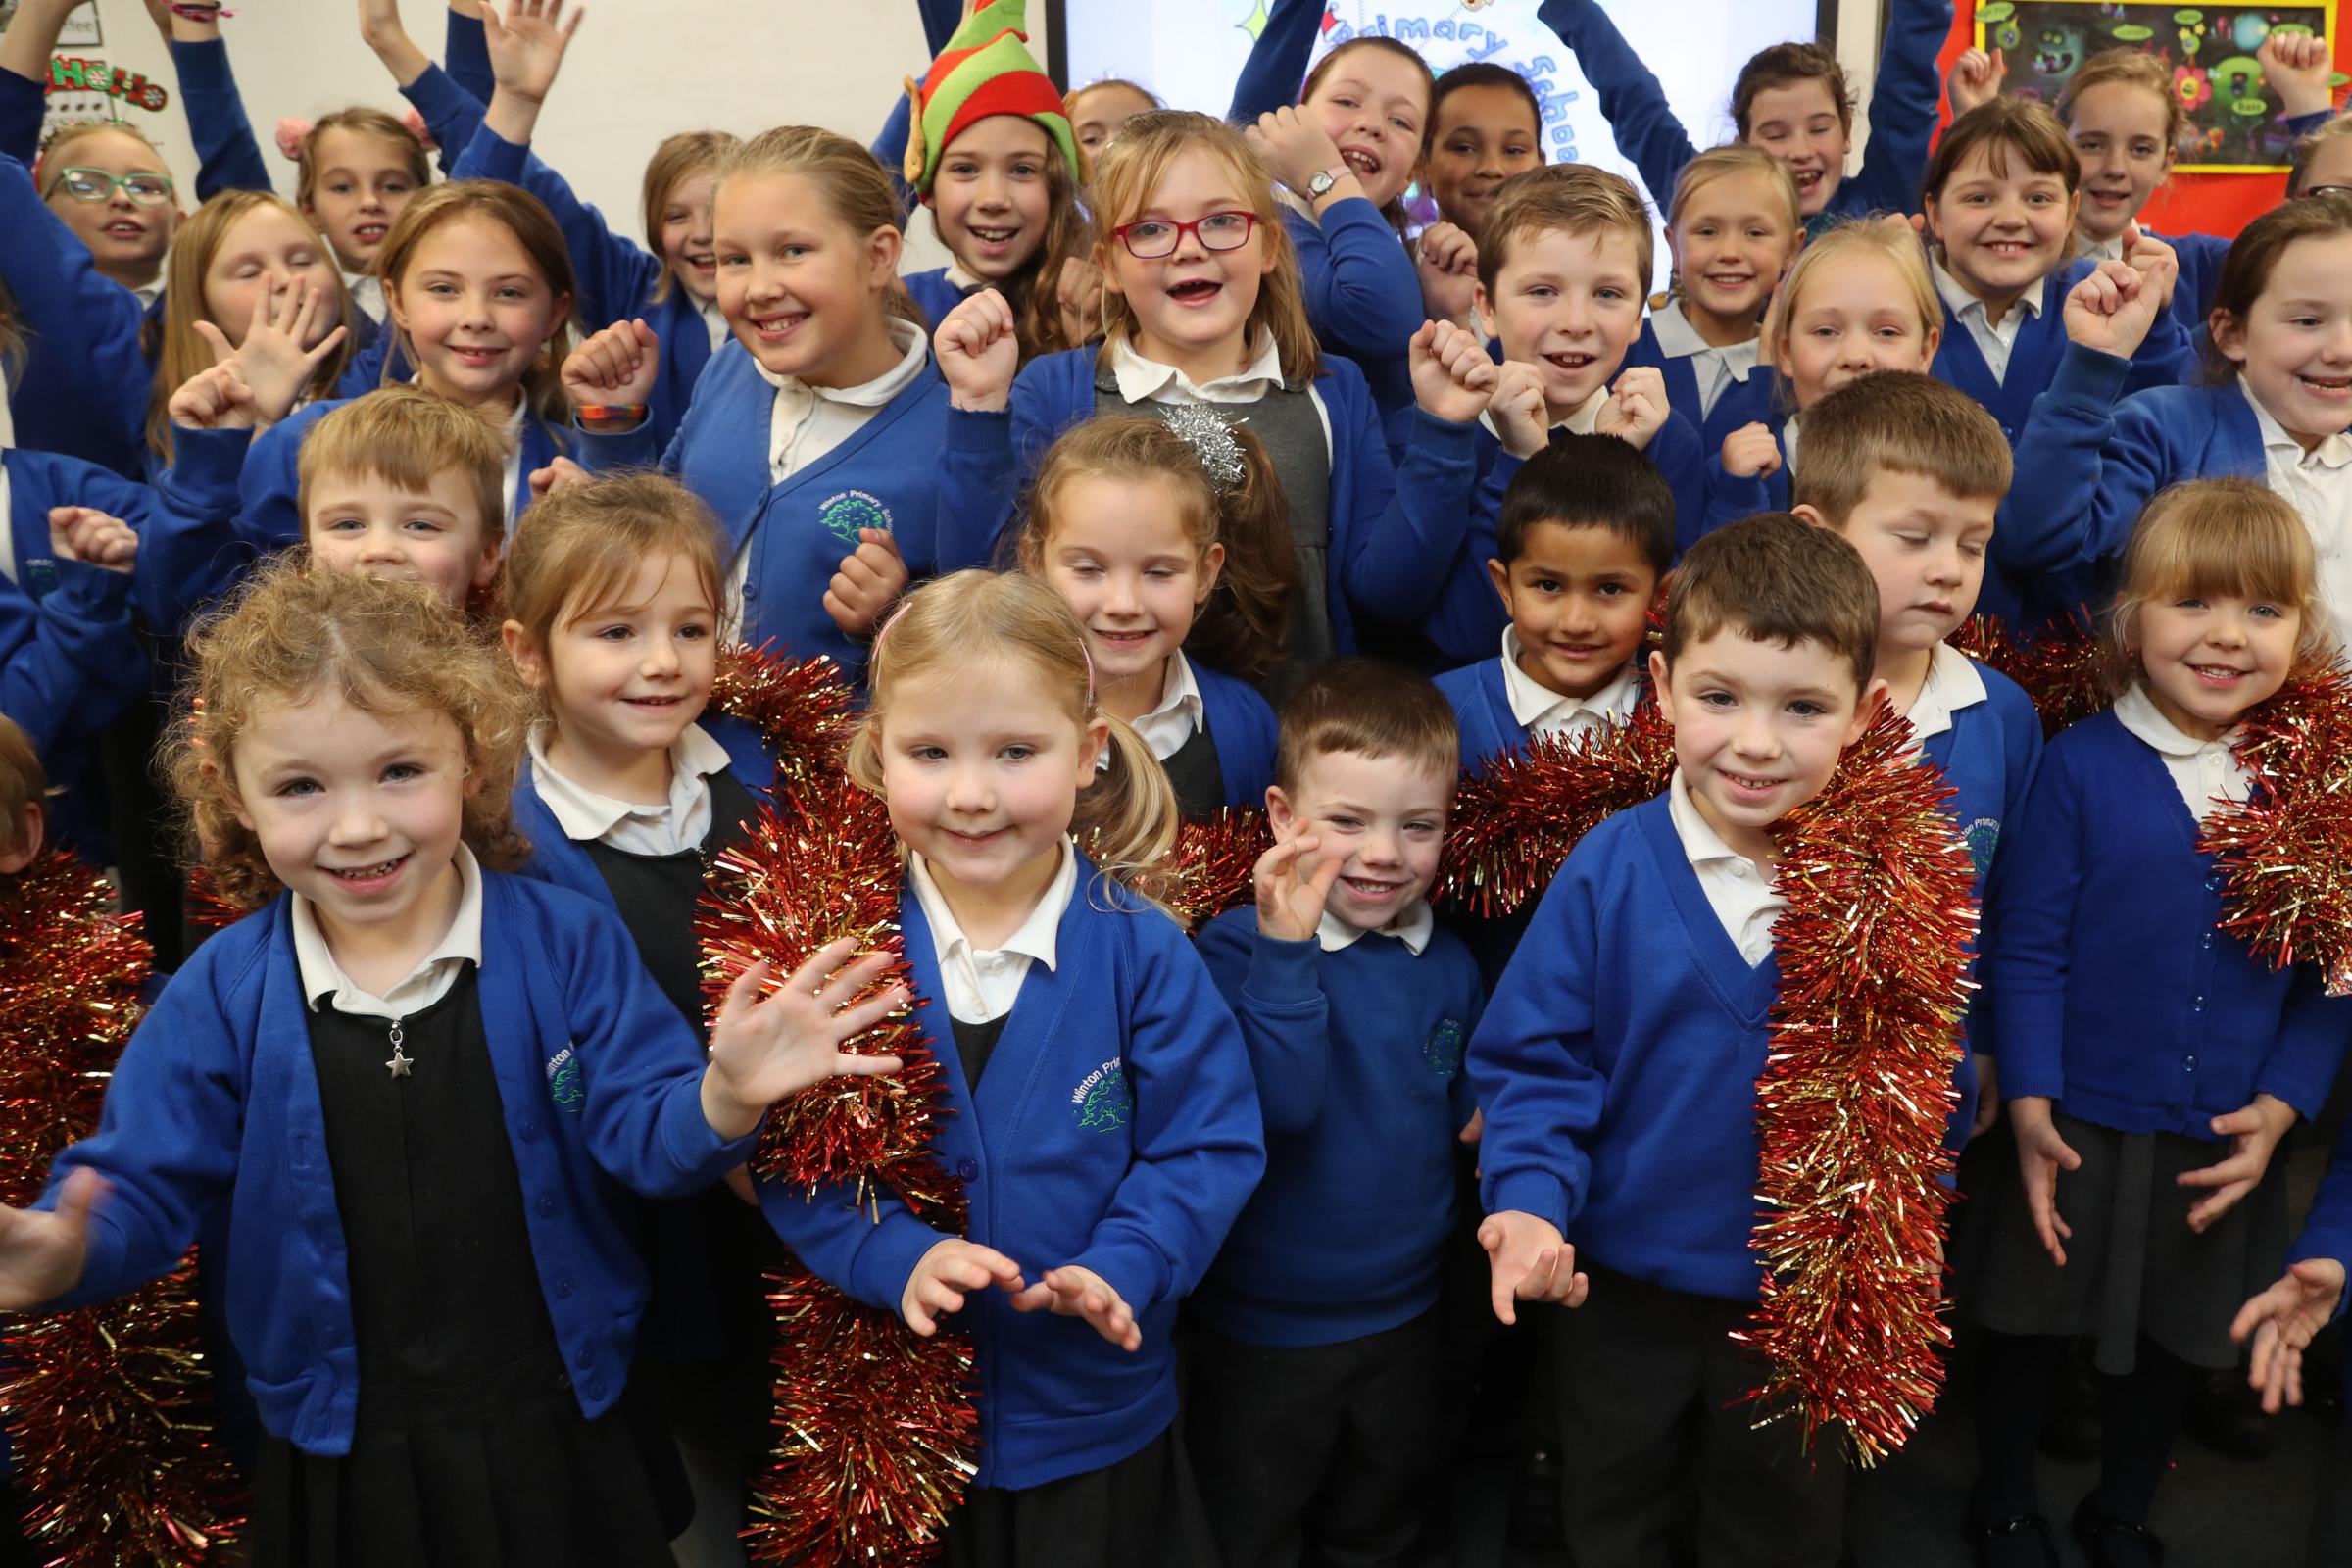 WATCH: Could this Bournemouth school be this year's Christmas number 1?